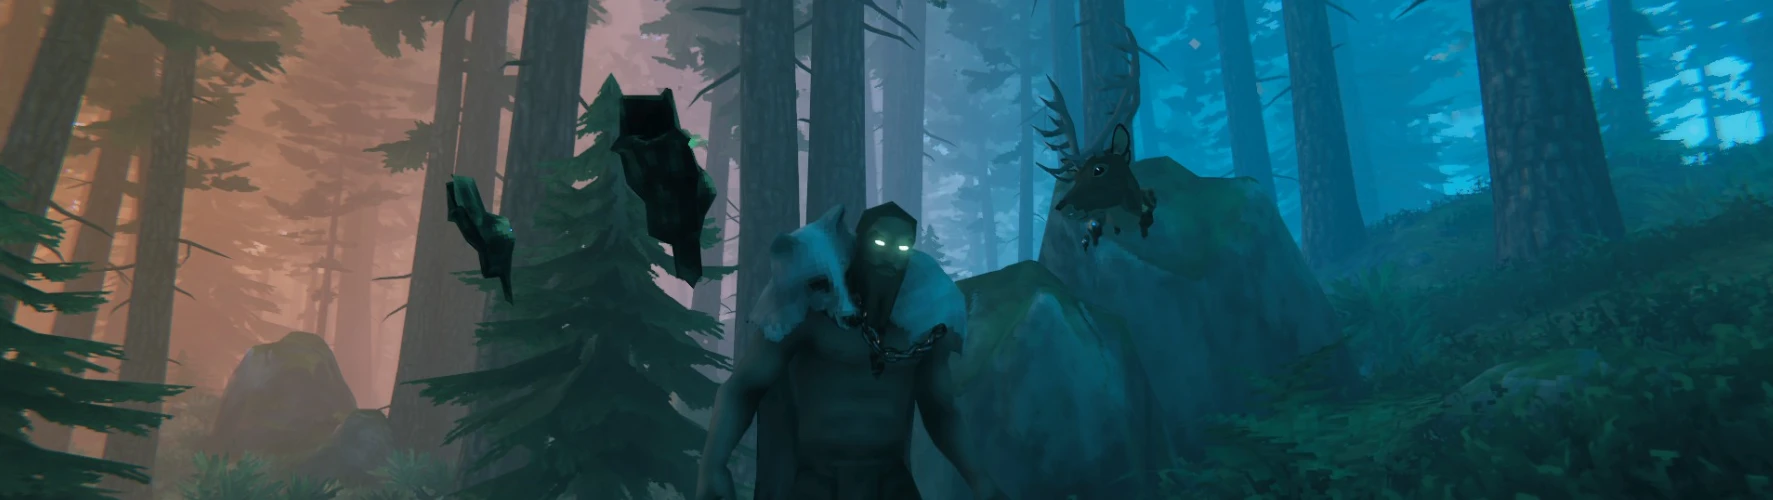 A man with glowing green eyes standing in a forest, surrounded by floating phantasmal animal heads